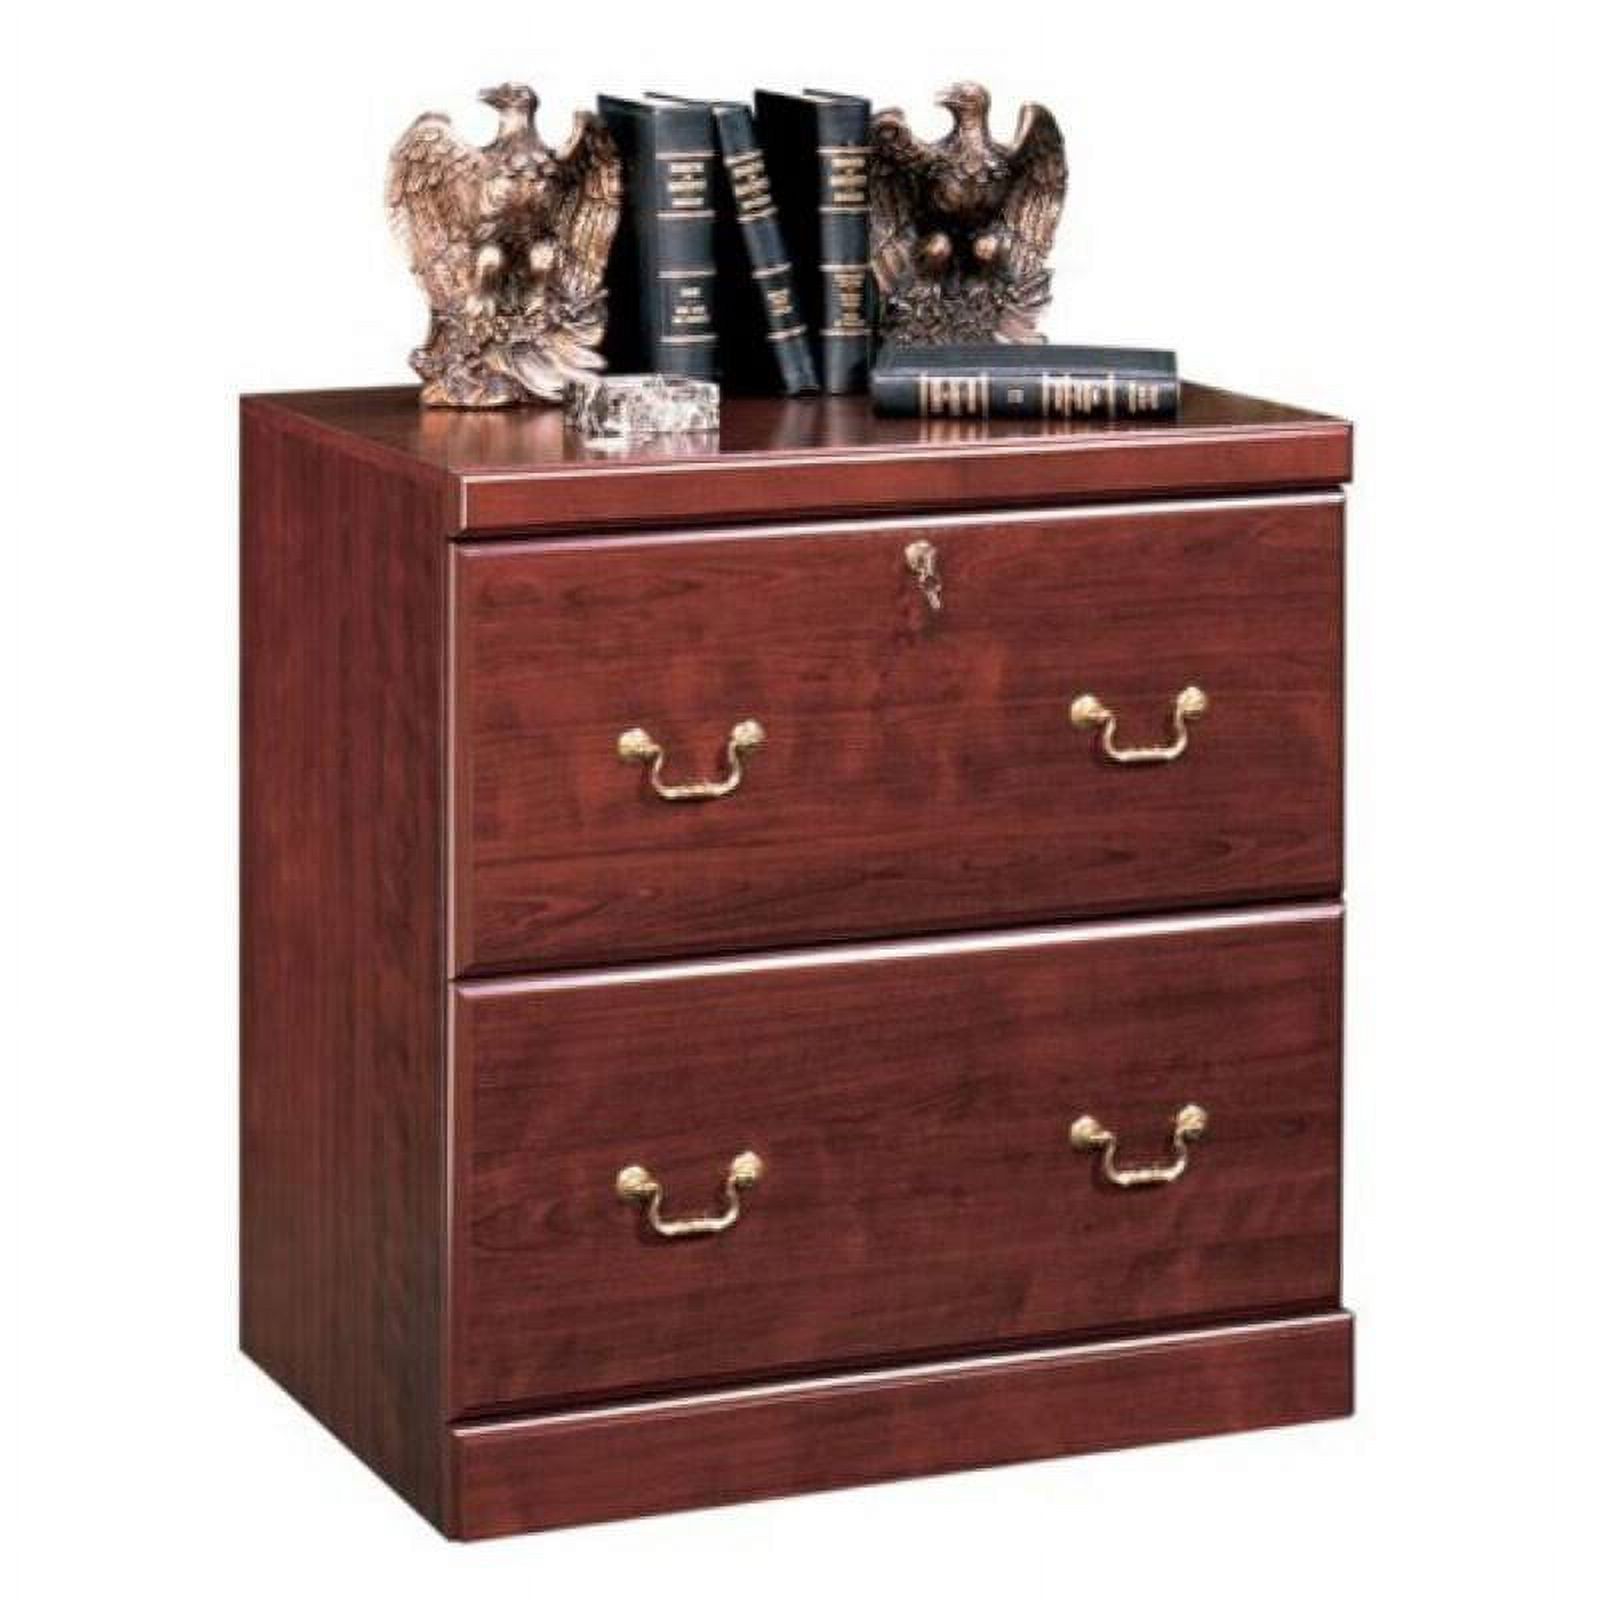 Pemberly Row Traditional Wood 2 Drawer Lateral File Cabinet in Classic Cherry - image 1 of 3